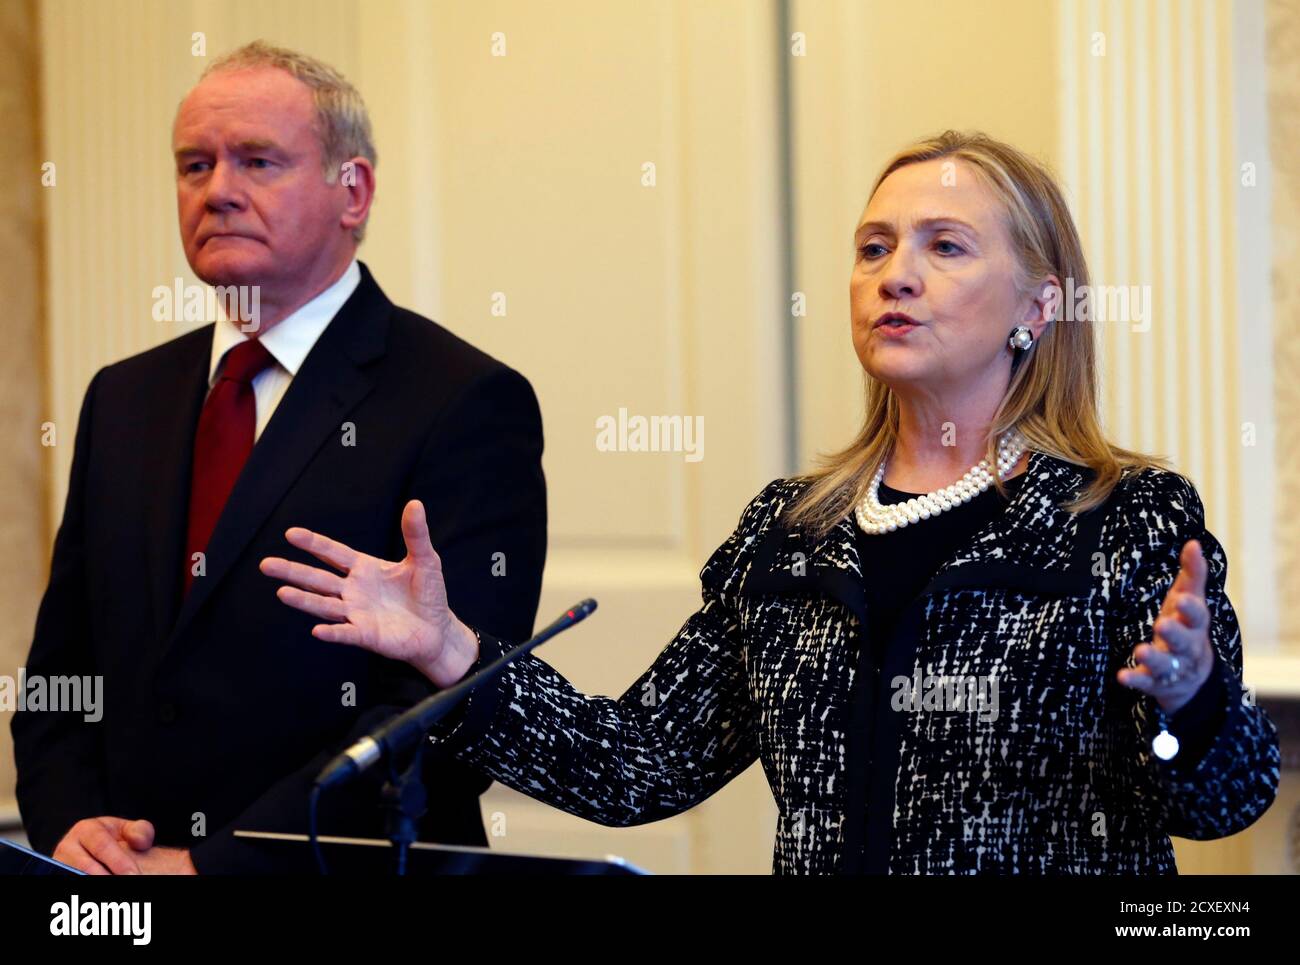 U.S. Secretary of State Hillary Clinton speaks during a news conference as Northern Ireland's Deputy First Minister Martin McGuinness listens at Stormont Castle in Belfast December 7, 2012. Clinton travelled to Northern Ireland on Friday to lend her support to the British province's fragile peace, the frailty of which was underlined by overnight rioting on the eve of her visit and the seizure of a bomb. REUTERS/Kevin Lamarque (NORTHERN IRELAND - Tags: POLITICS) Stock Photo